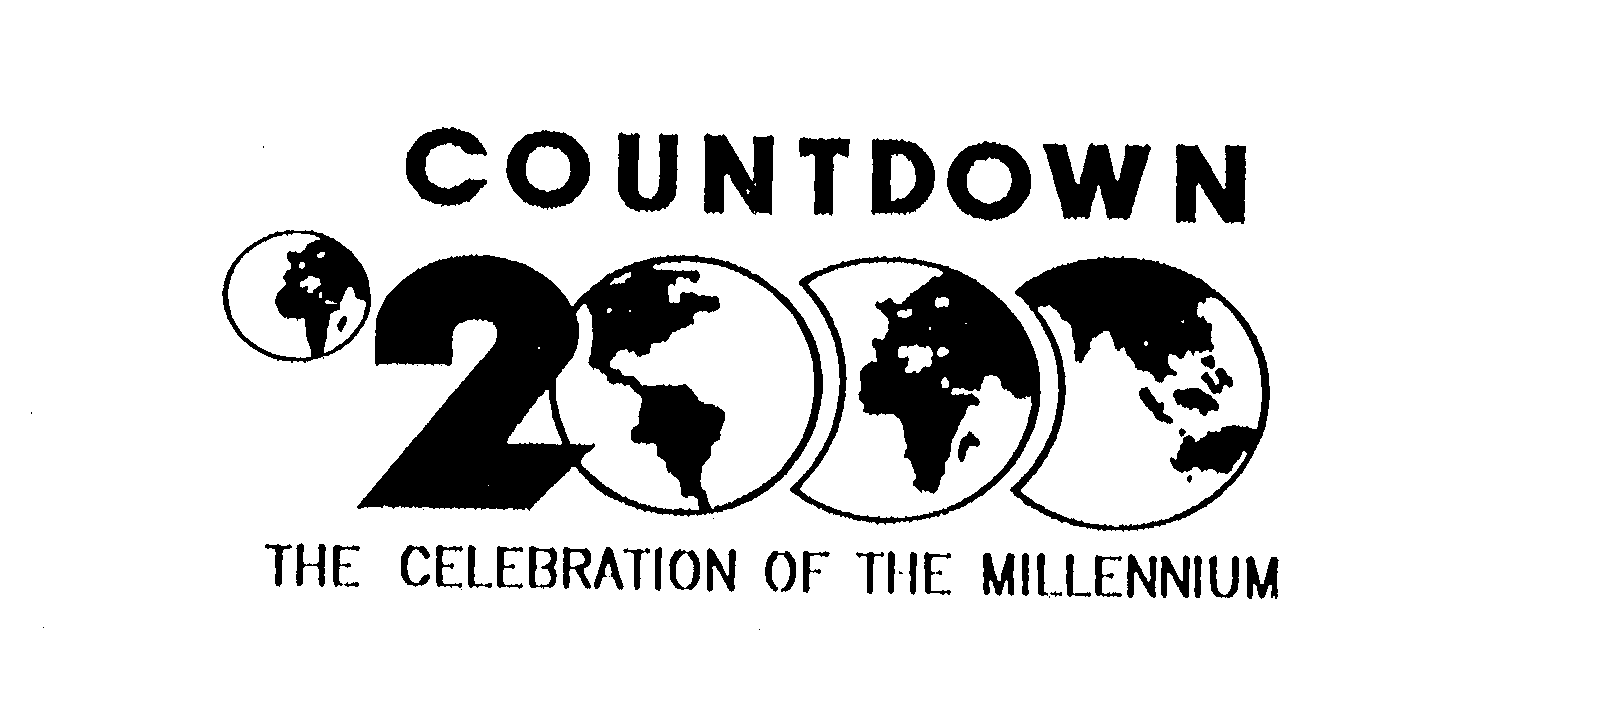  COUNTDOWN 2000 THE CELEBRATION OF THE MILLENNIUM